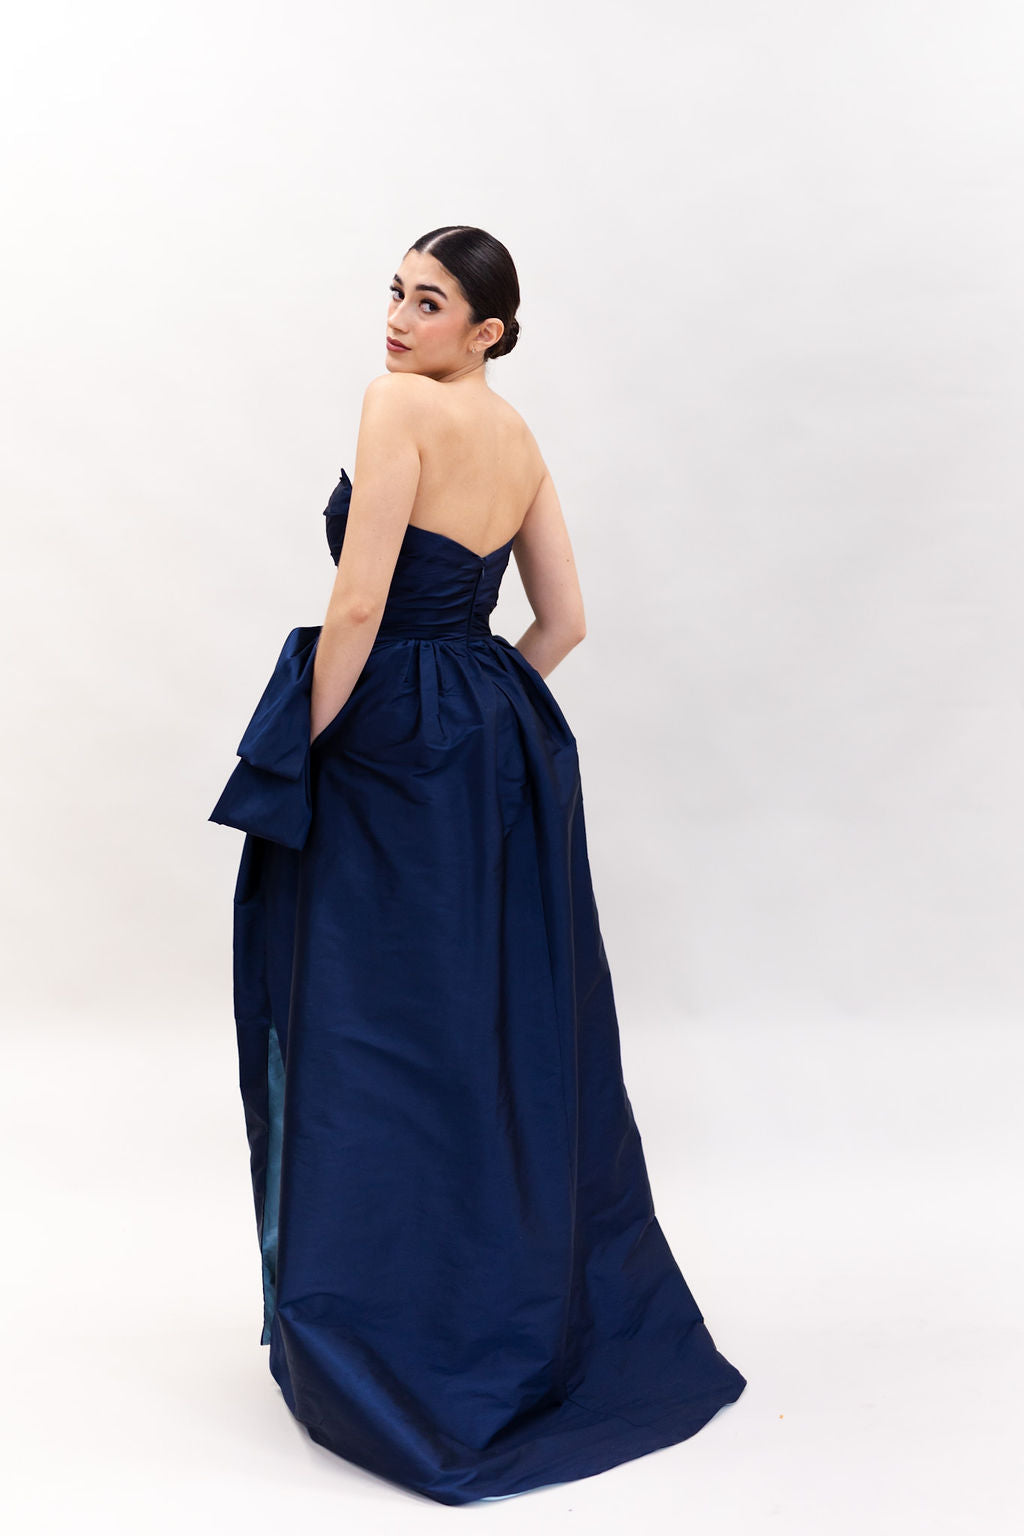 DRAPPED TAFFETA BLUE GOWN WITH SIDE SLIT